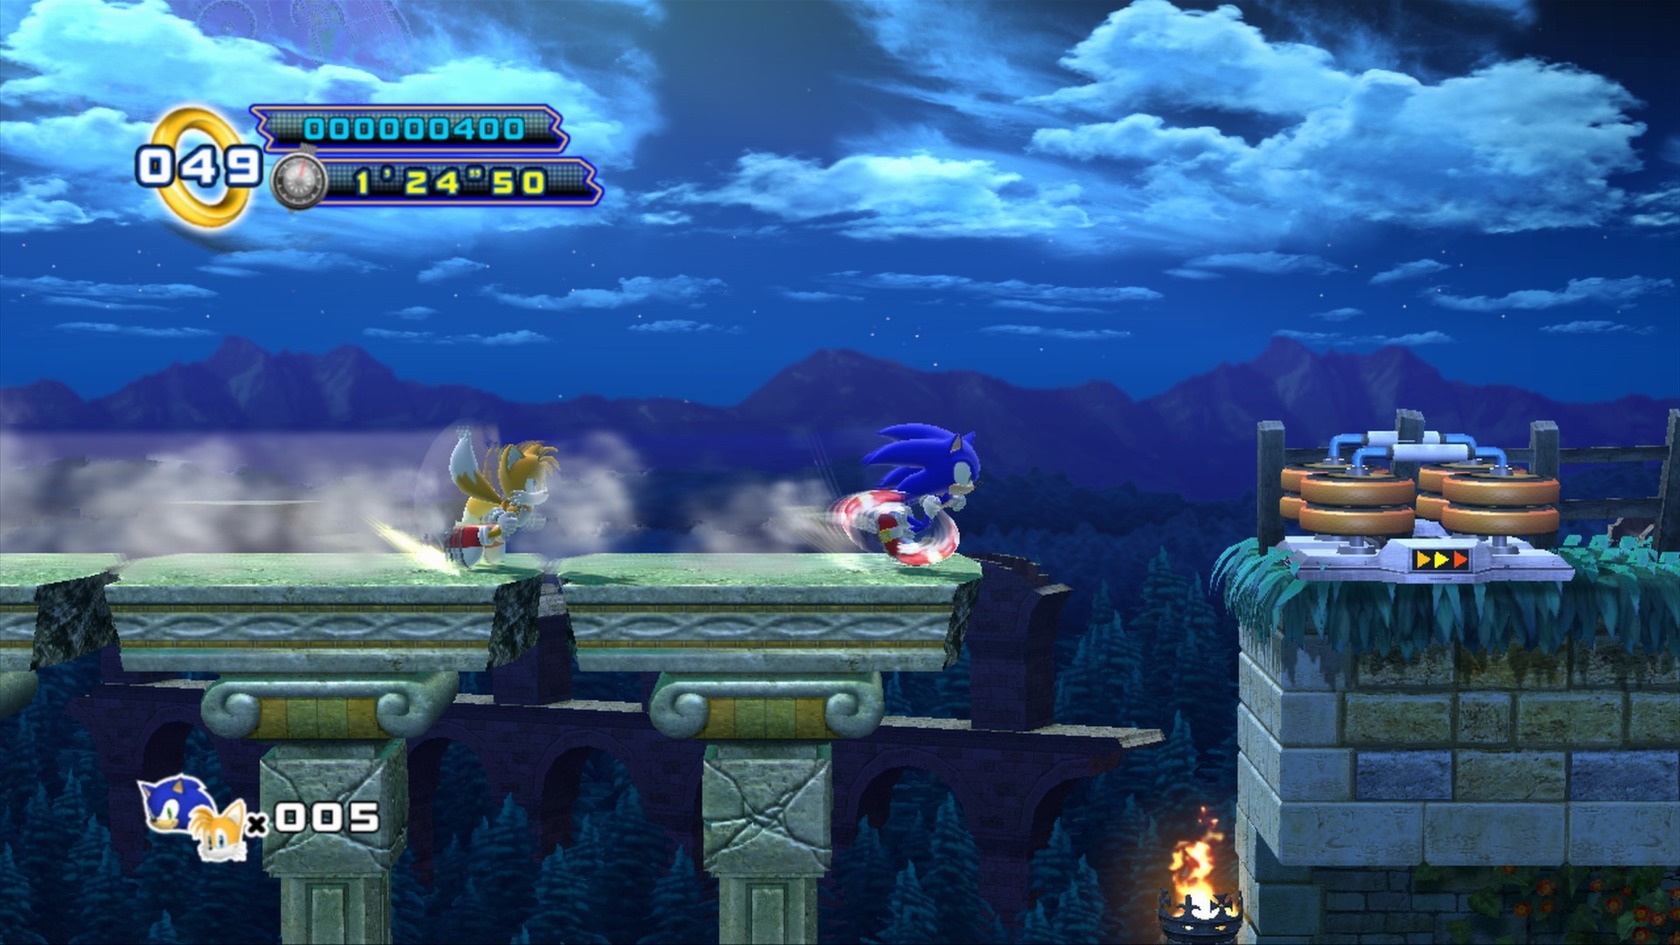 Sonic the Hedgehog 4: Episode 2 PC Review